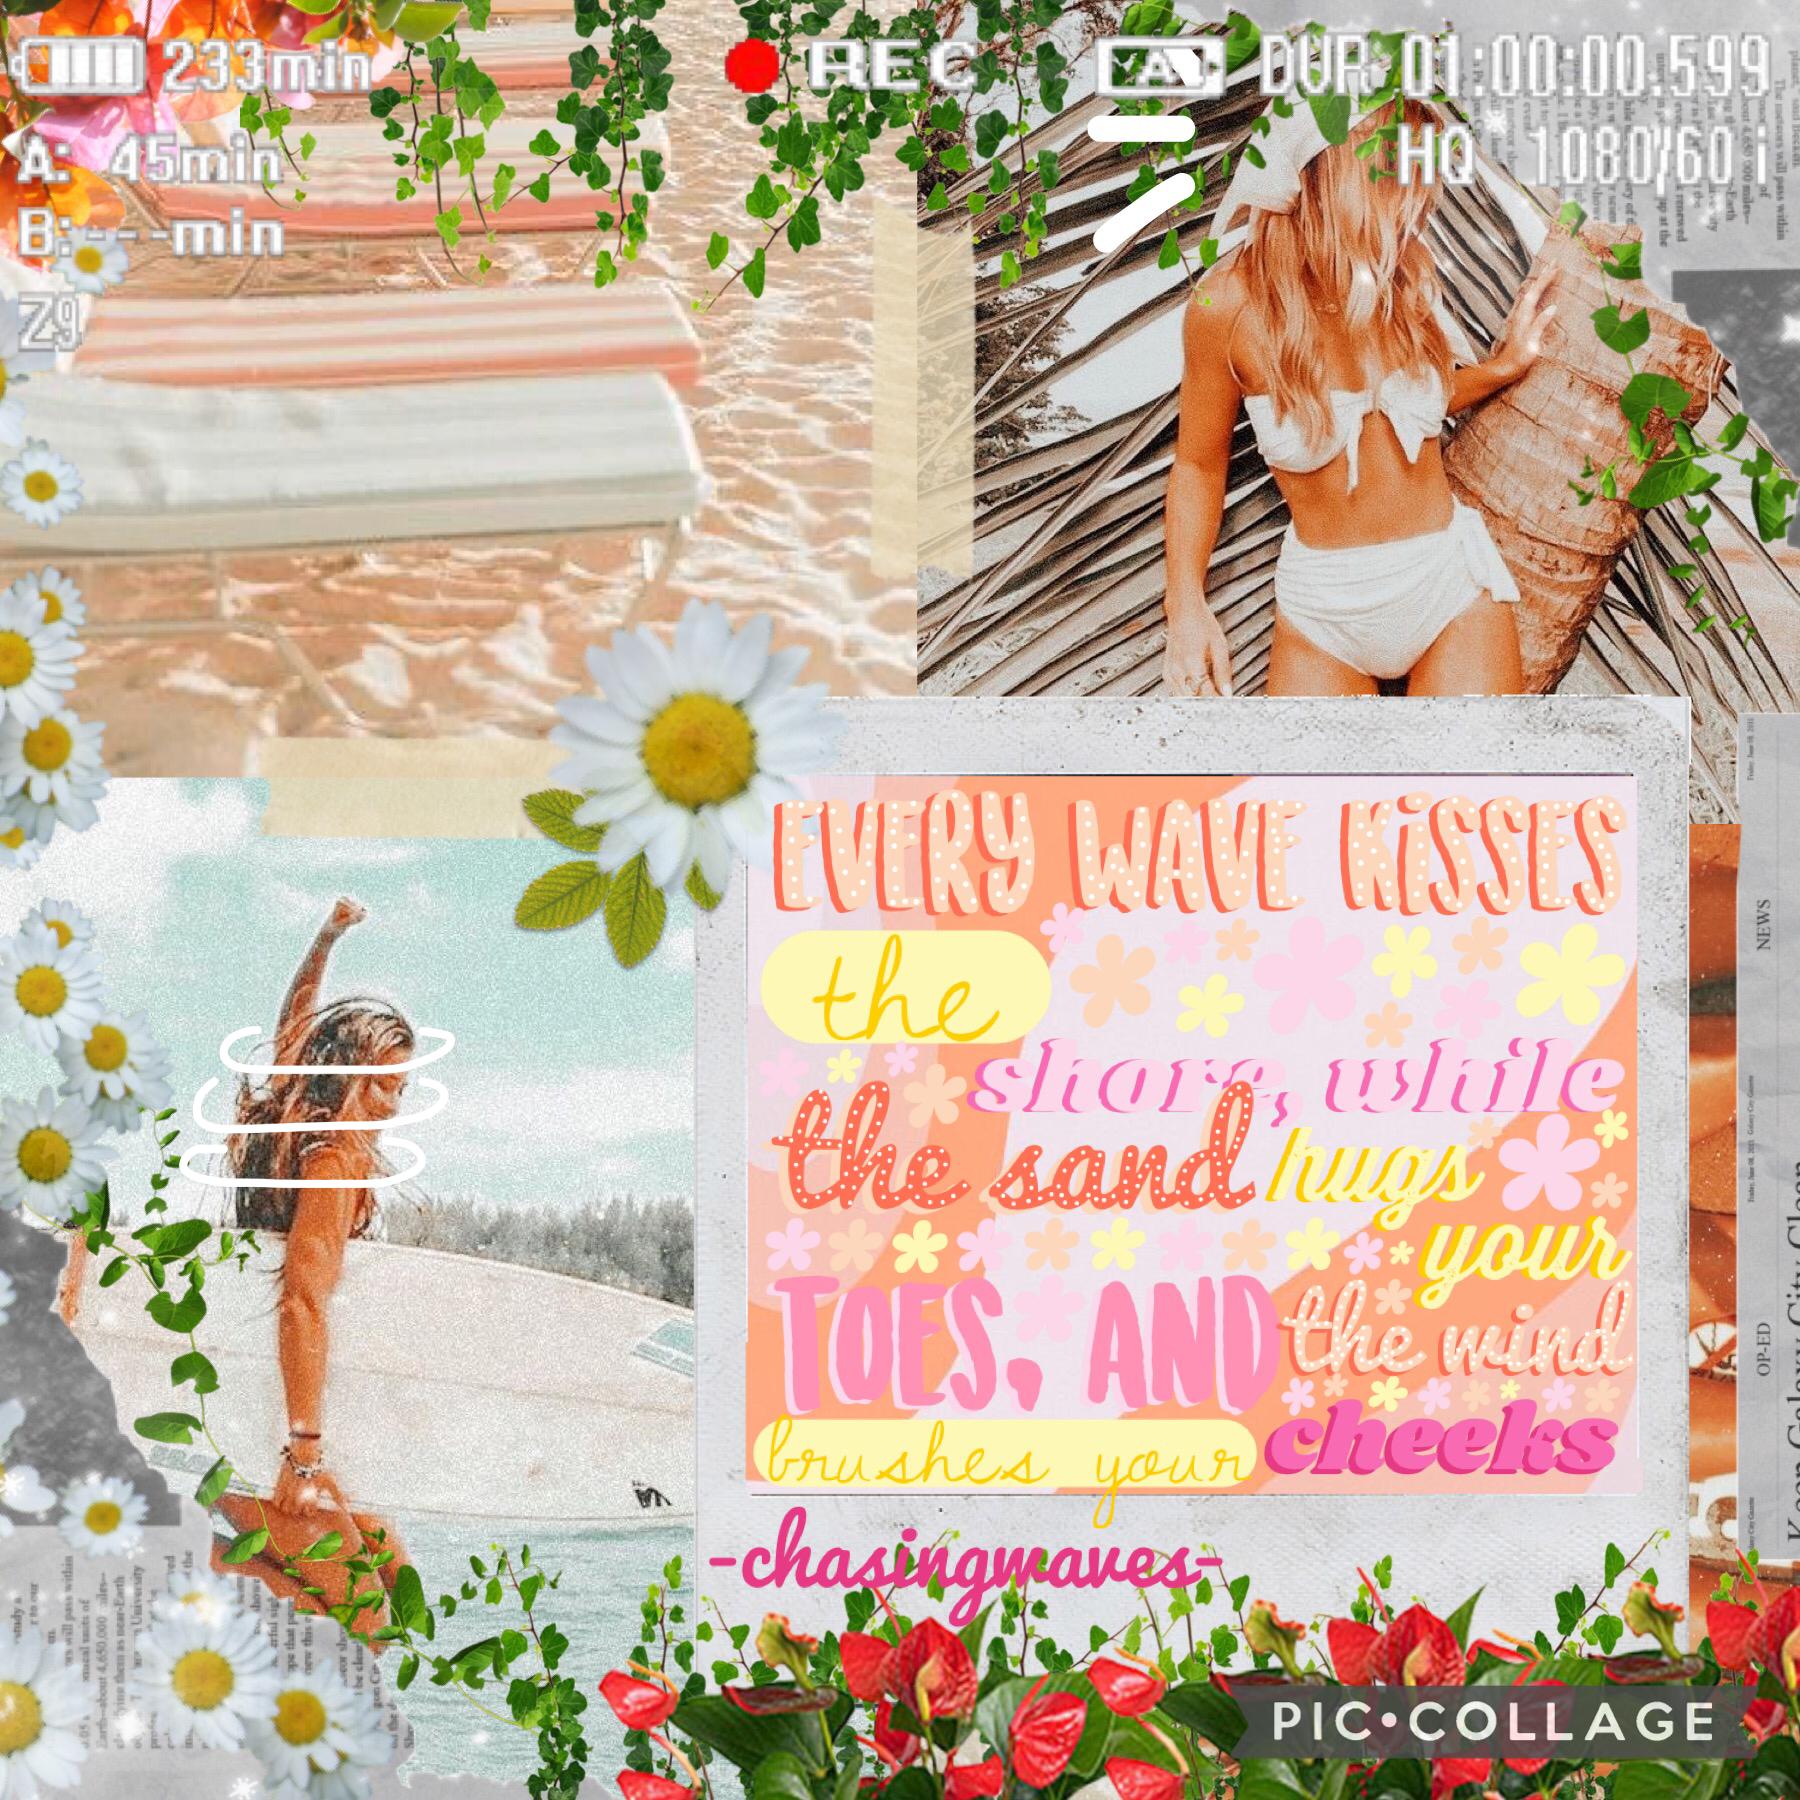 Tap
Here’s my collage for May! I hope you all like it, it’s inspired by the lovely clear-blue-water!